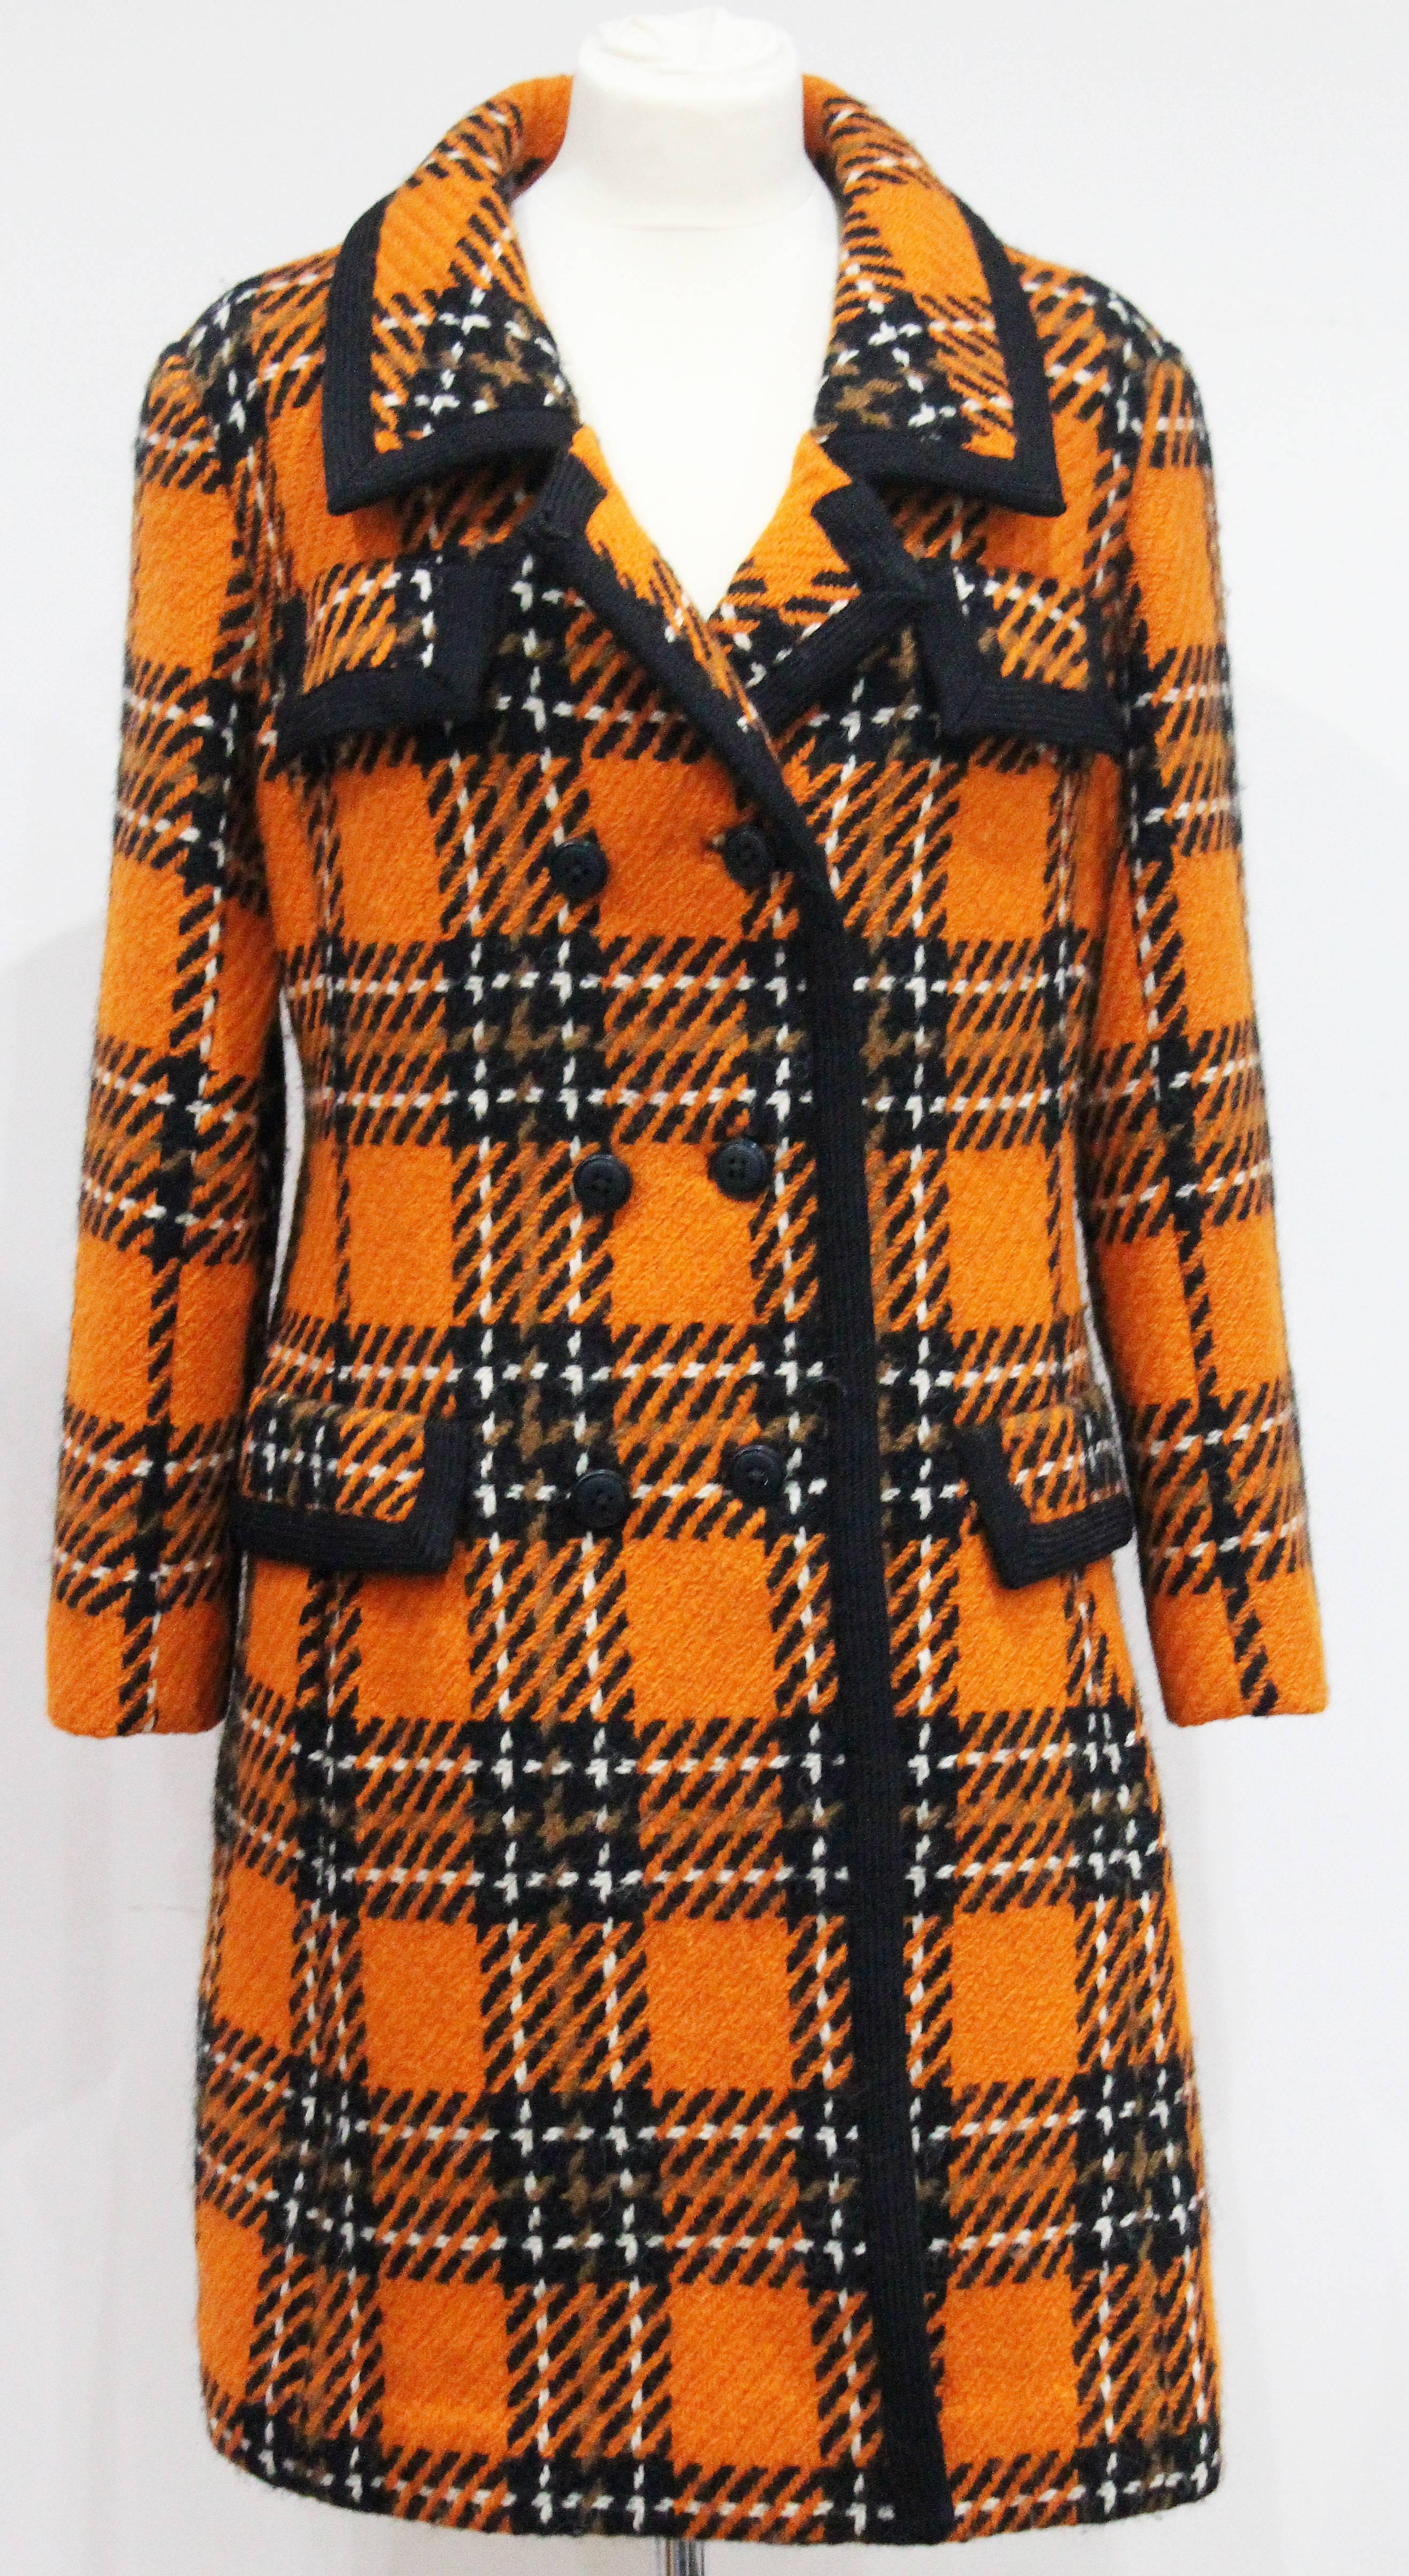 An exceptional english tweed coat by Royal Dressmaker Hardy Amies. The coat is in a vibrant and classic 1960s colour palette with orange, black and white in a fine woollen English tweed. 

Size: Medium - Large / Approx. UK 14 / Fr 42 
Shoulder to